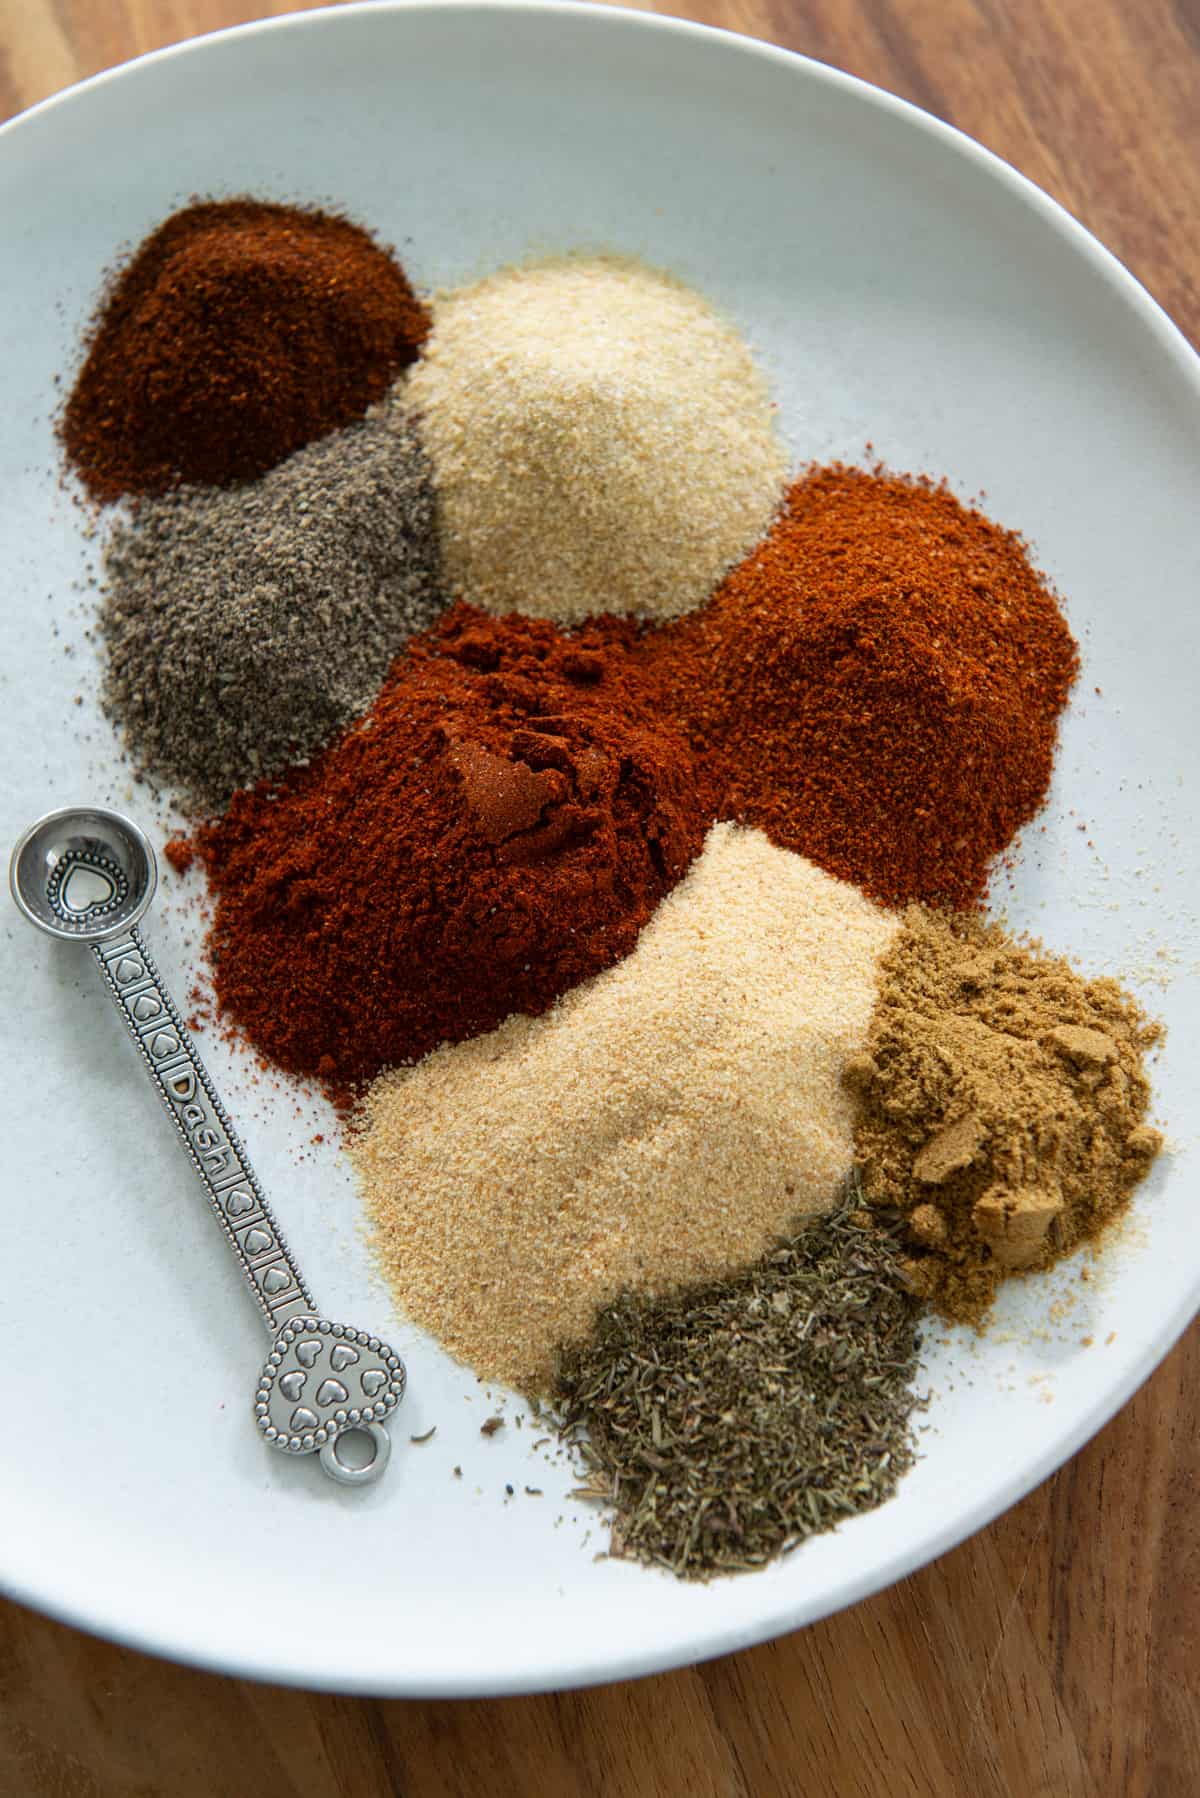 Spoonfuls of various spices and herbs on a plate